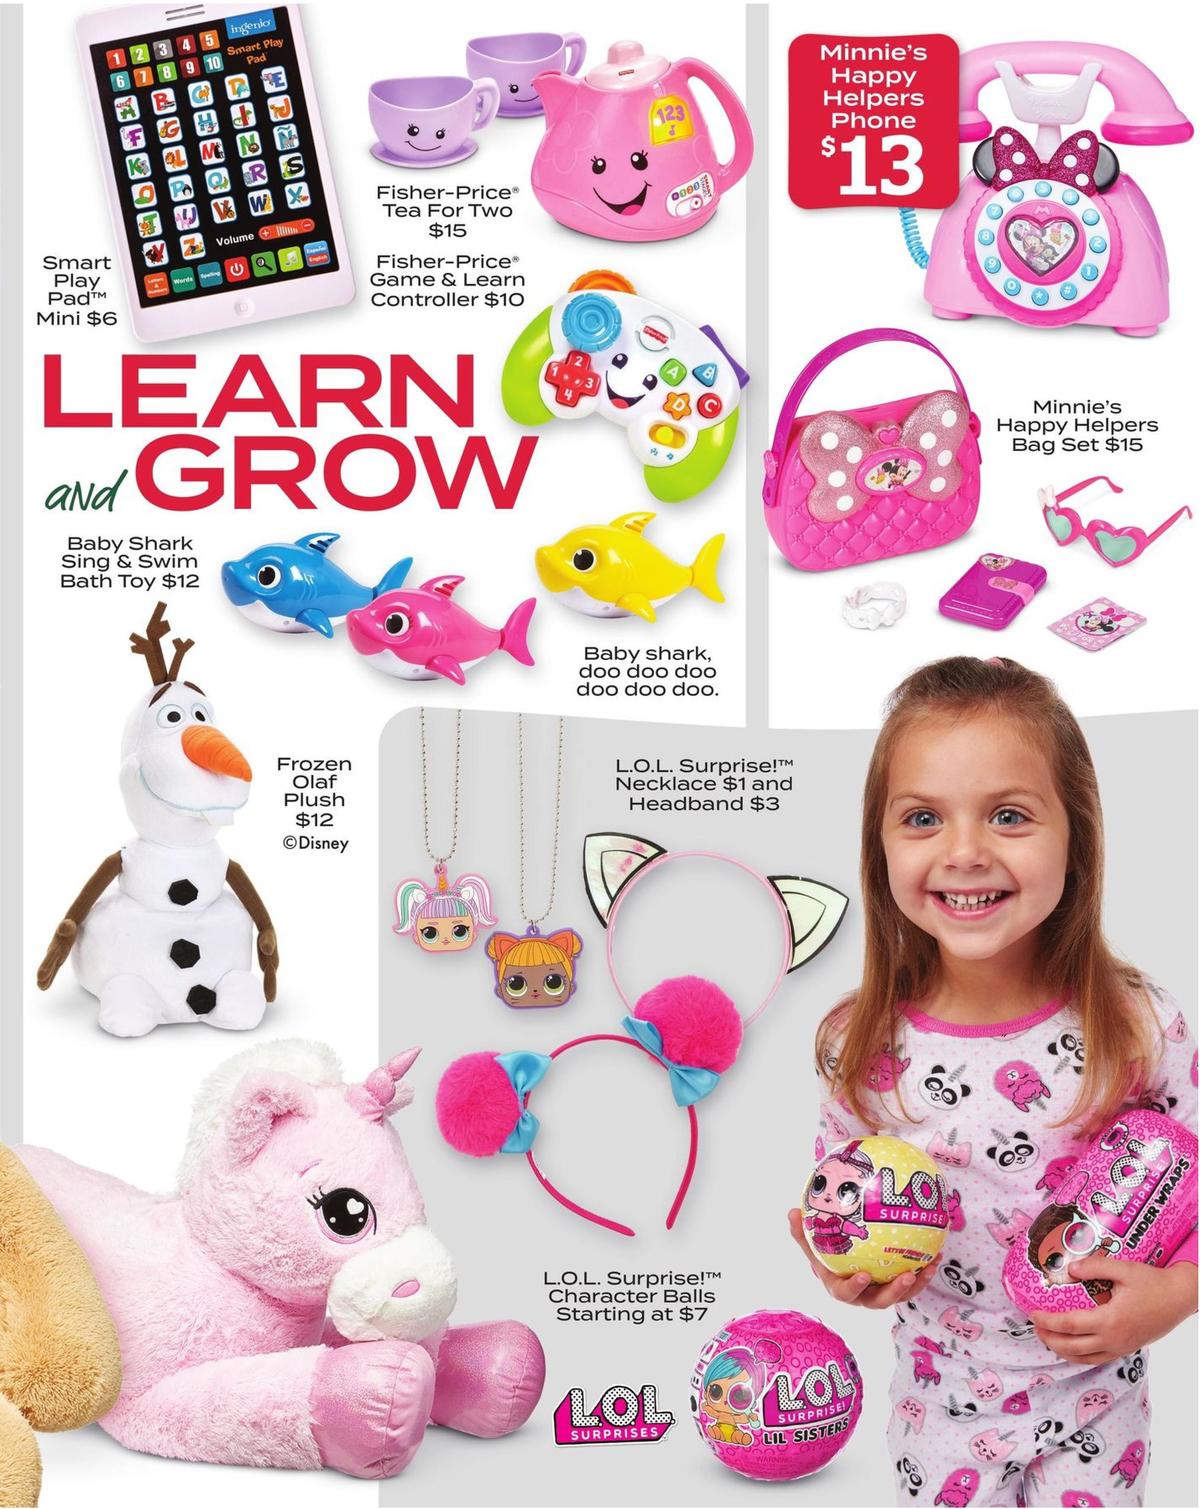 Dollar General Explore More at Dollar General Weekly Ad from September 29